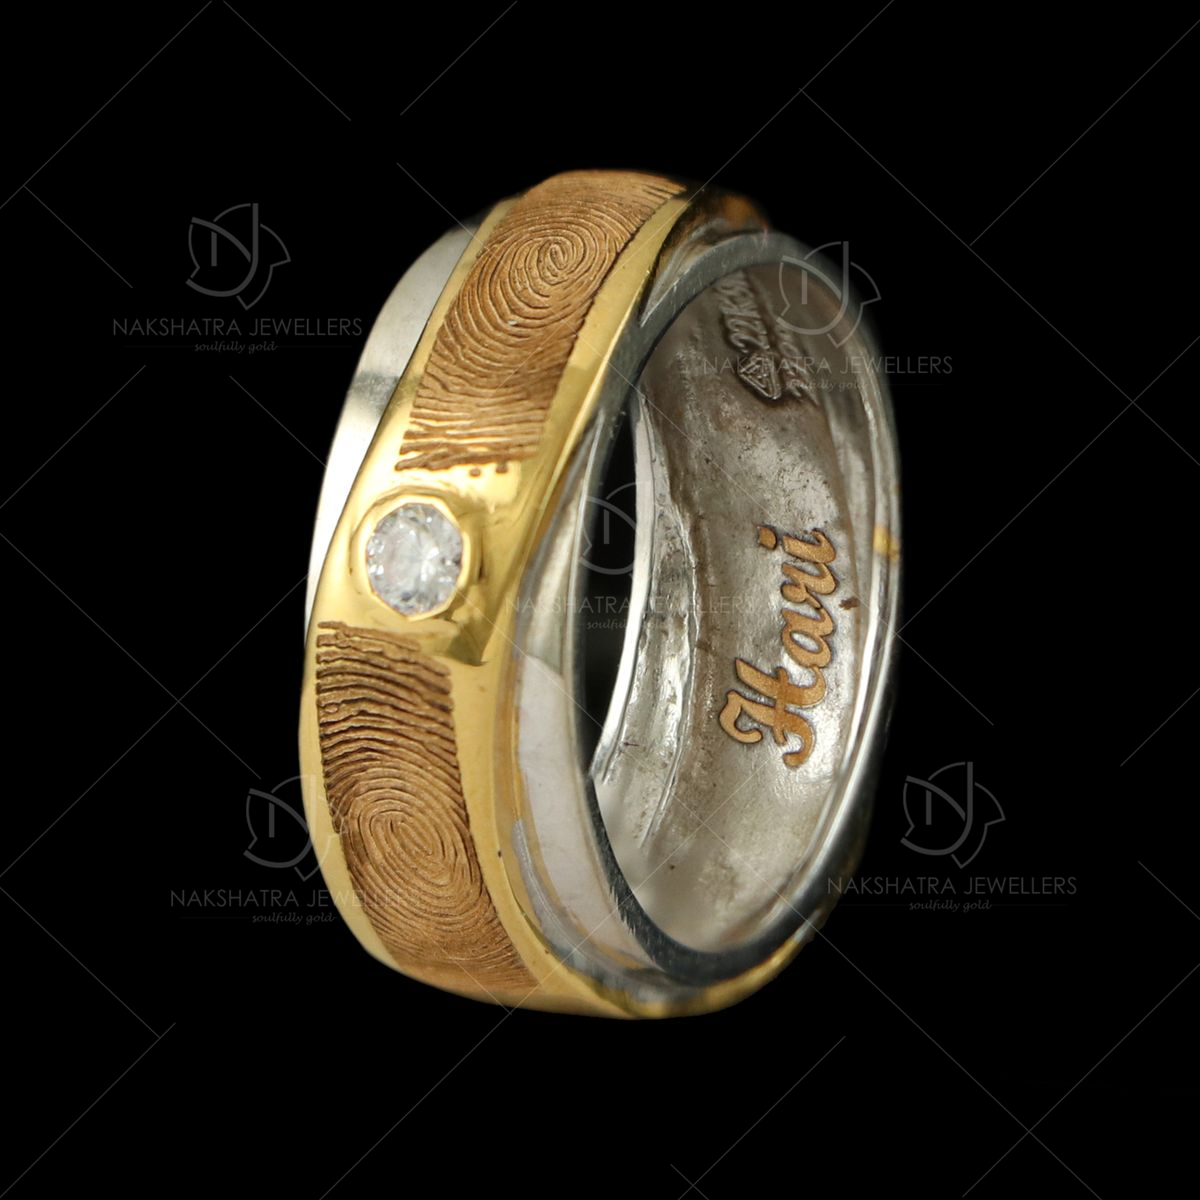 Personable Name Engraved Gold Couple Rings